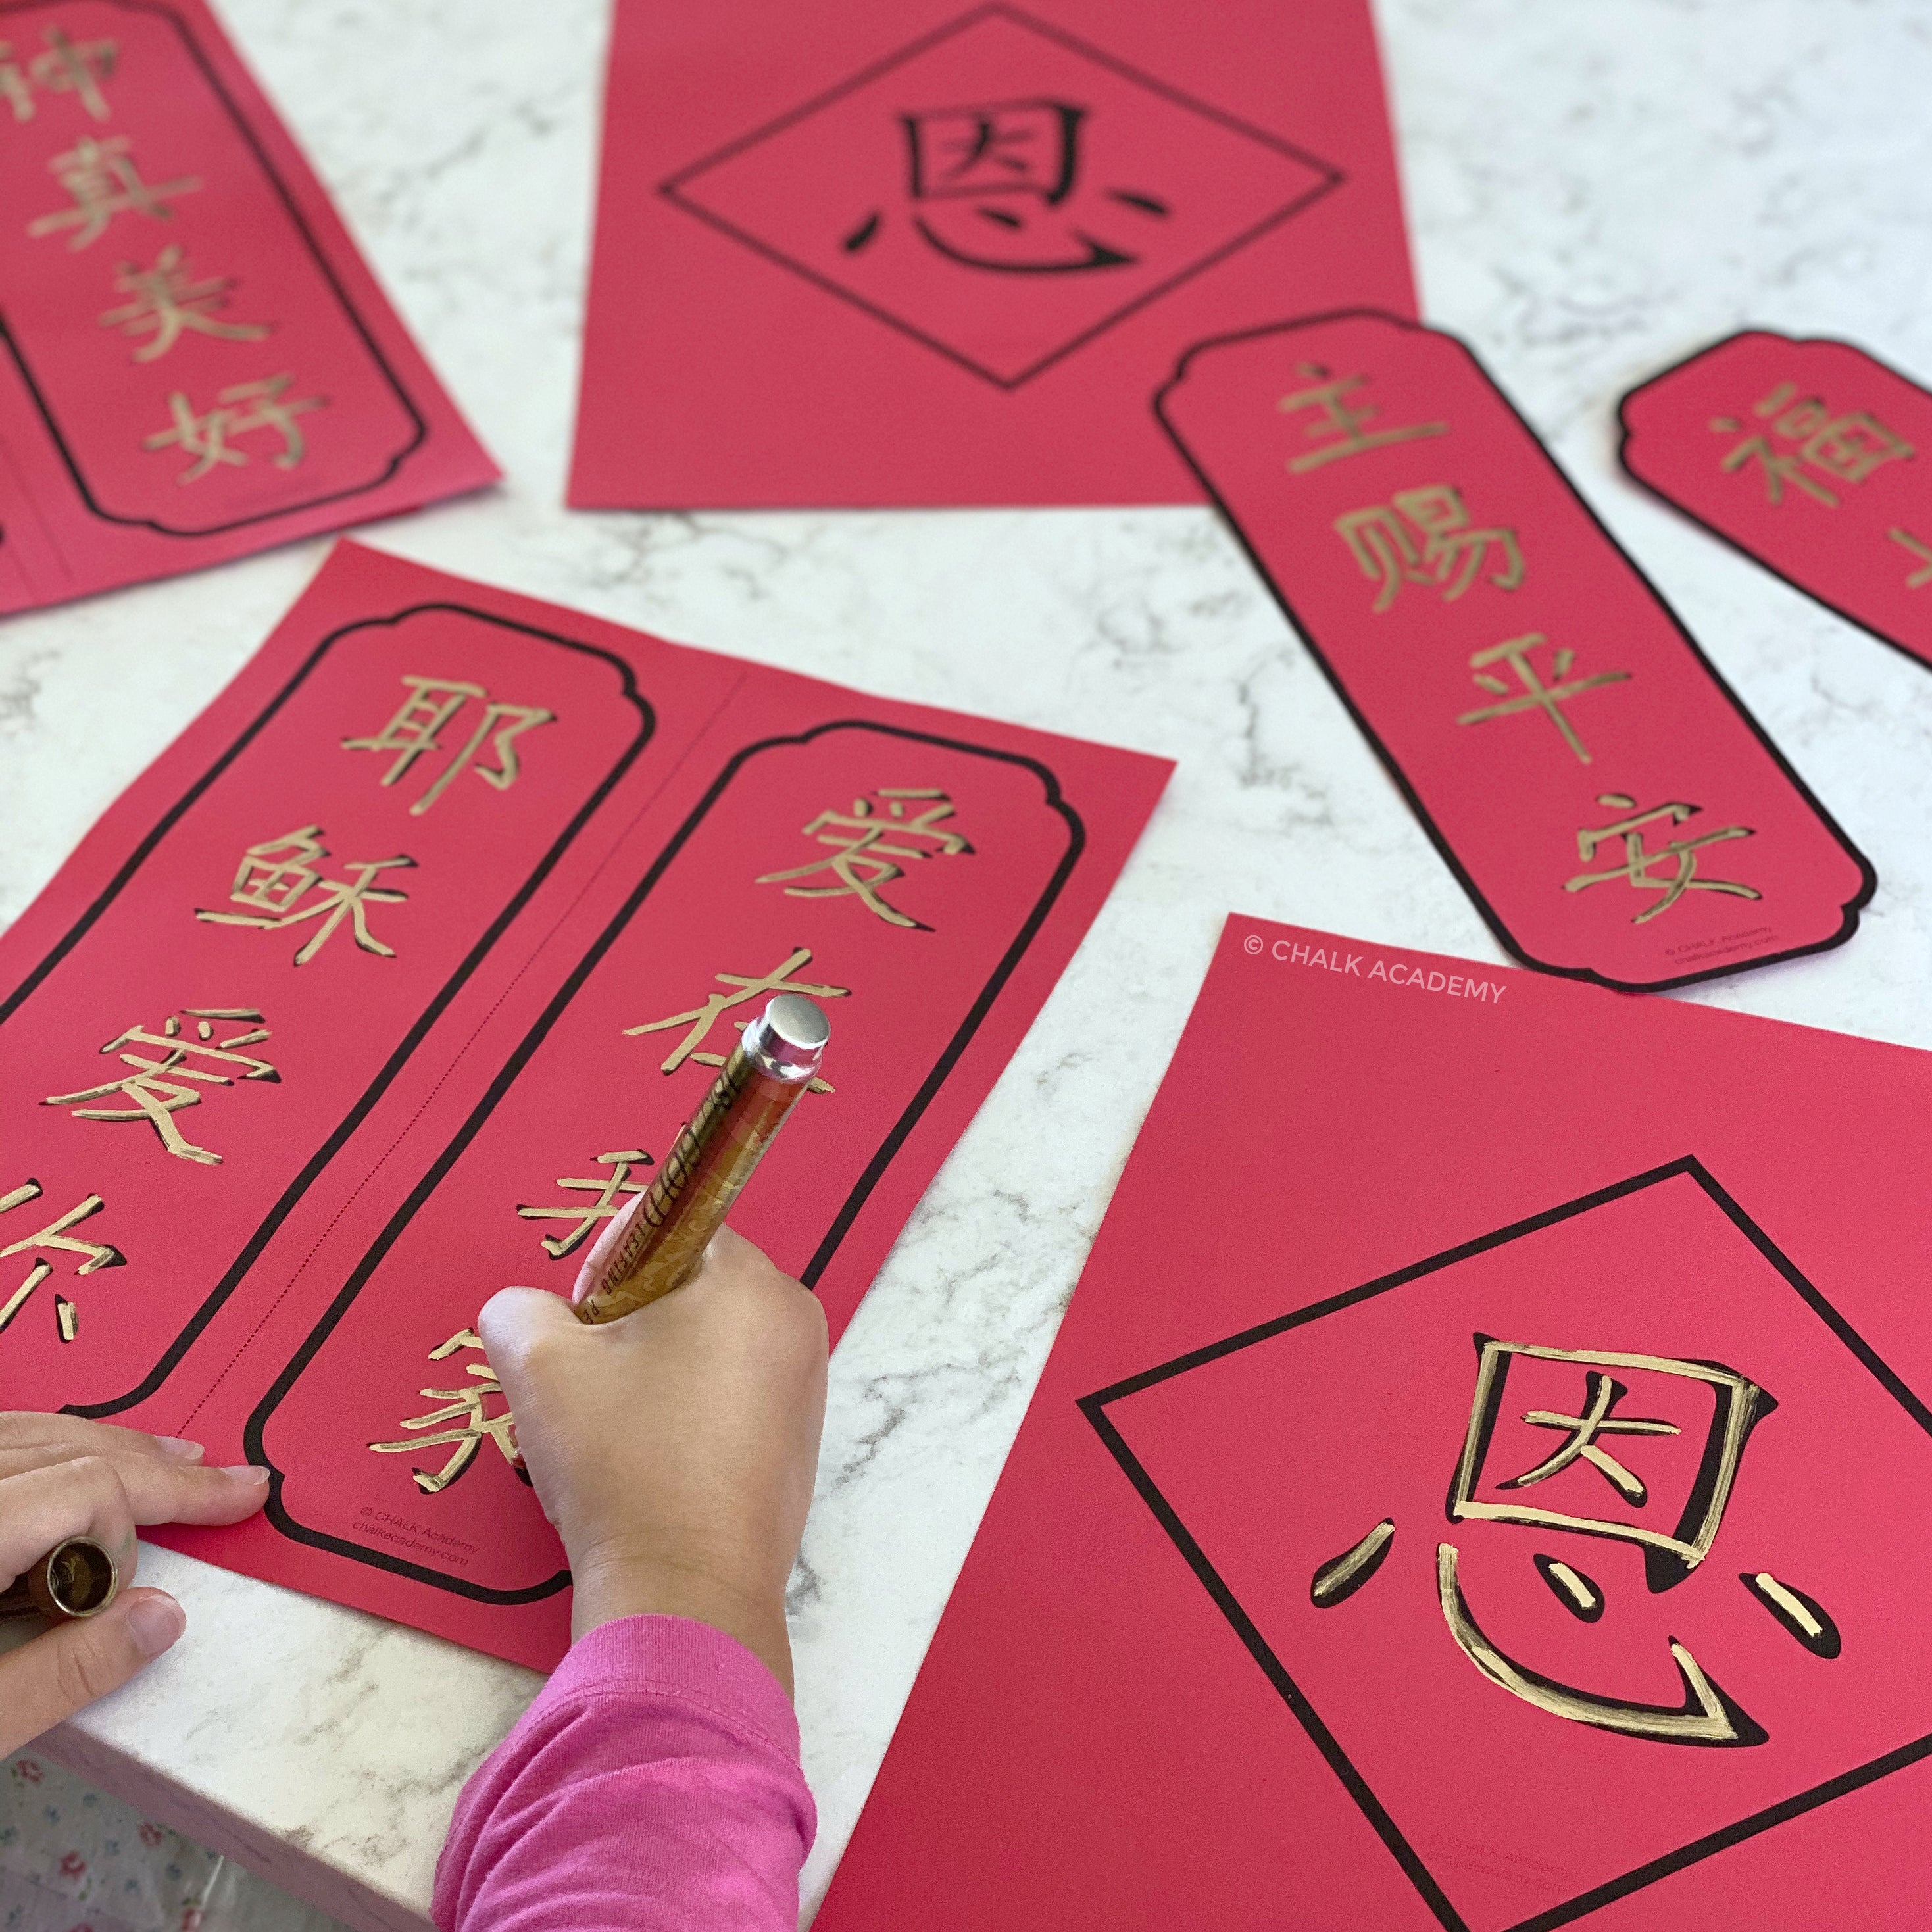 Set Of Flat Design Chinese New Year Banners. The Set Can Be used For  Several Purposes Like: Websites Banners And badges, Printed Materials –  Greeting Cards, Gift Tags, labels, Stickers, Ads, Promotional